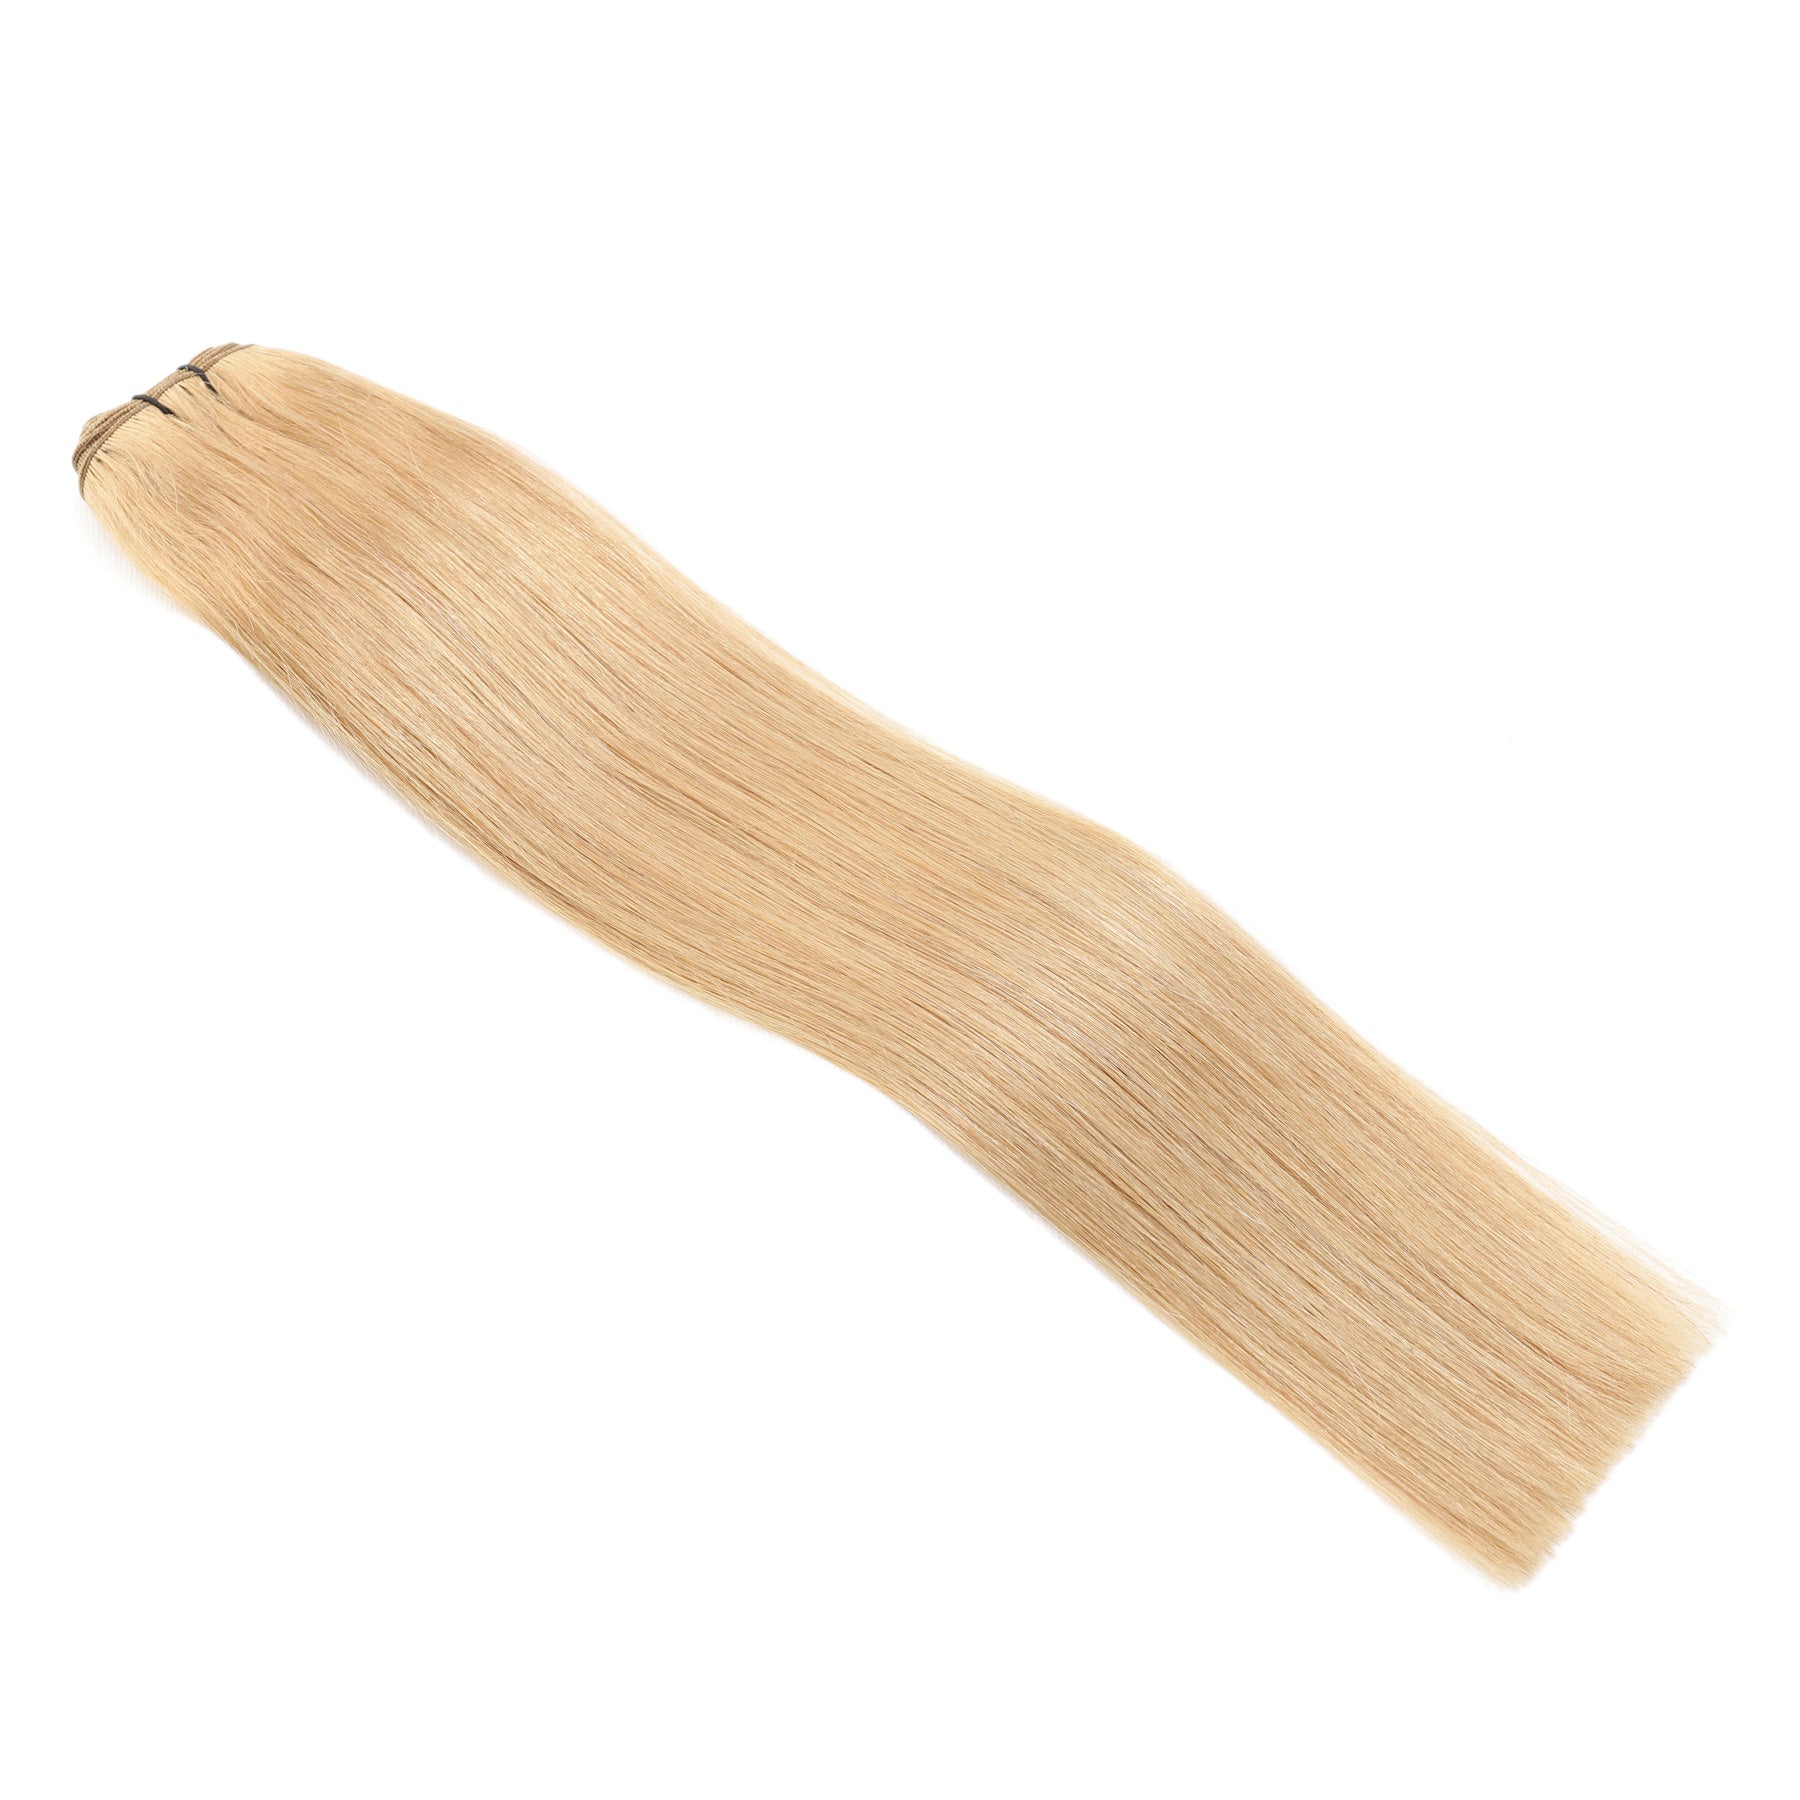 Honey Blonde Human Hair Extensions. Blend Weave Hair Extensions effortlessly with your natural hair, offering a seamless and natural appearance for all hair types.